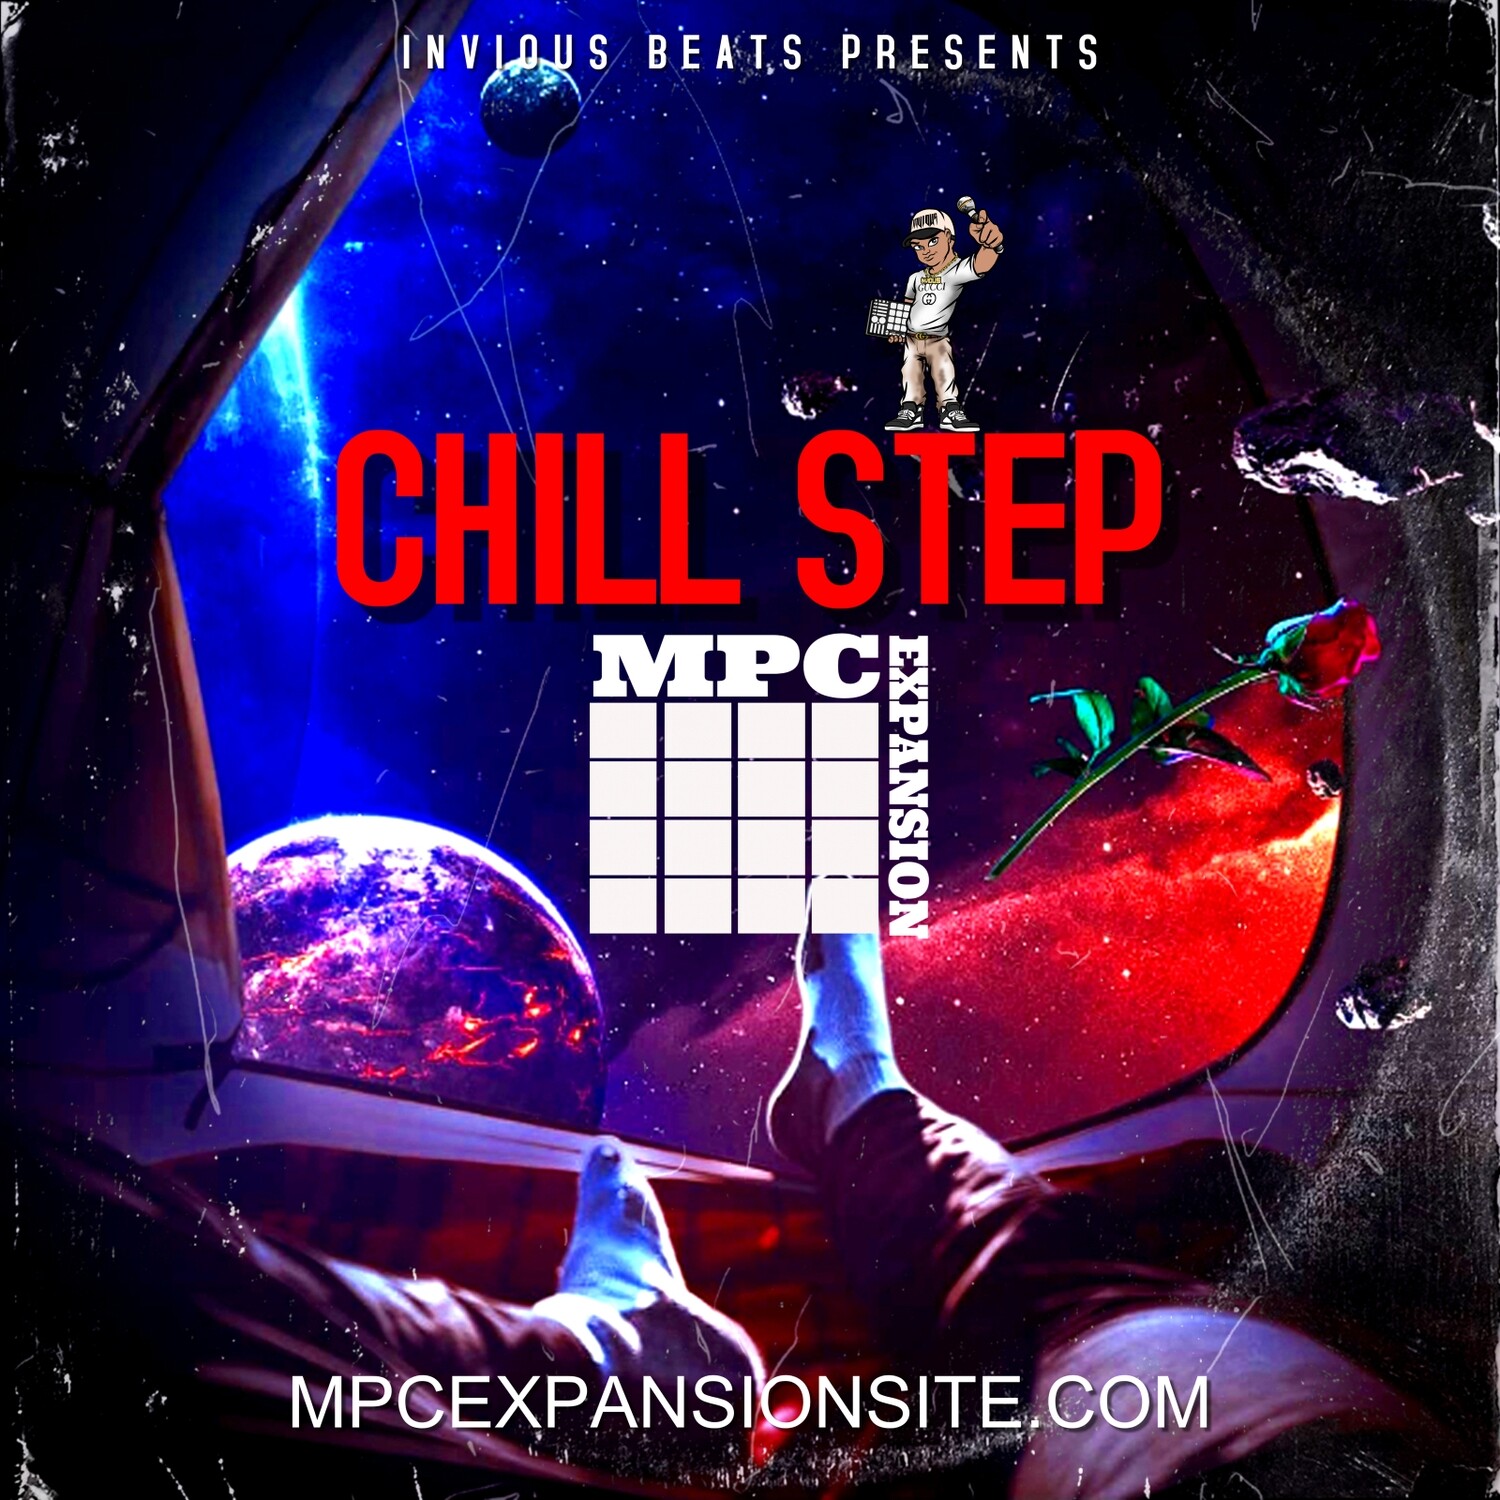 MPC EXPANSION 'CHILL STEP' by INVIOUS